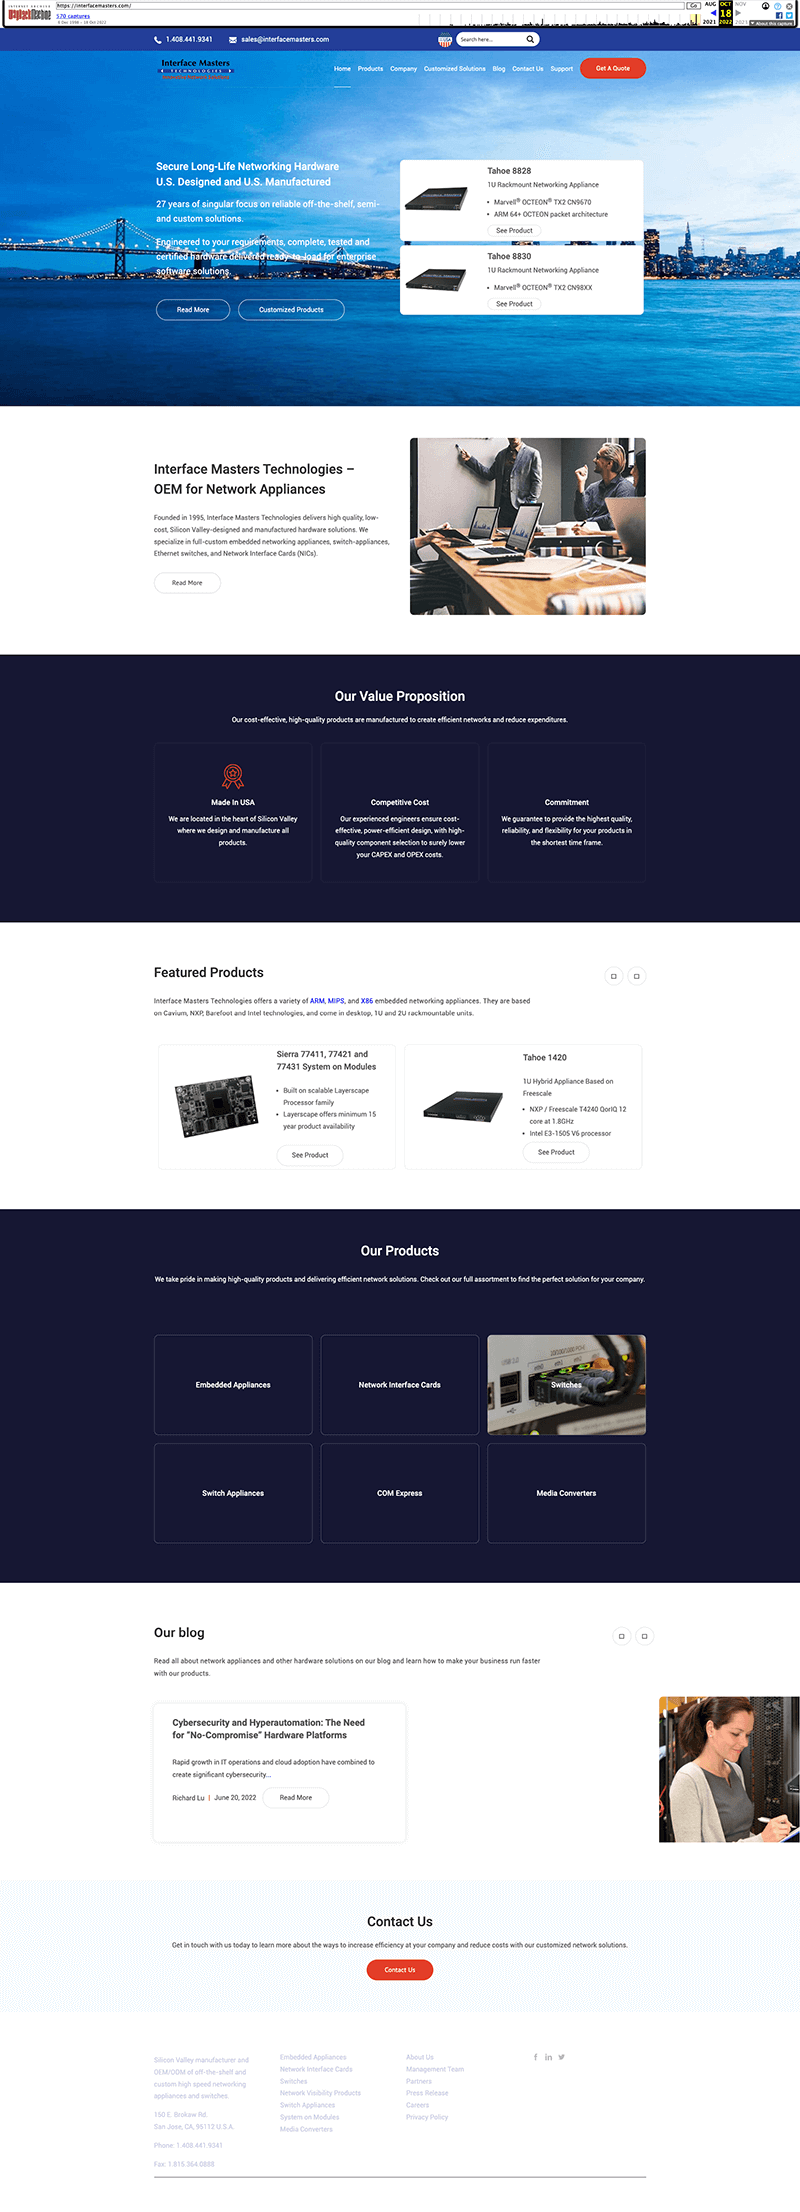 BEFORE-Homepage-Interface Masters Technologies